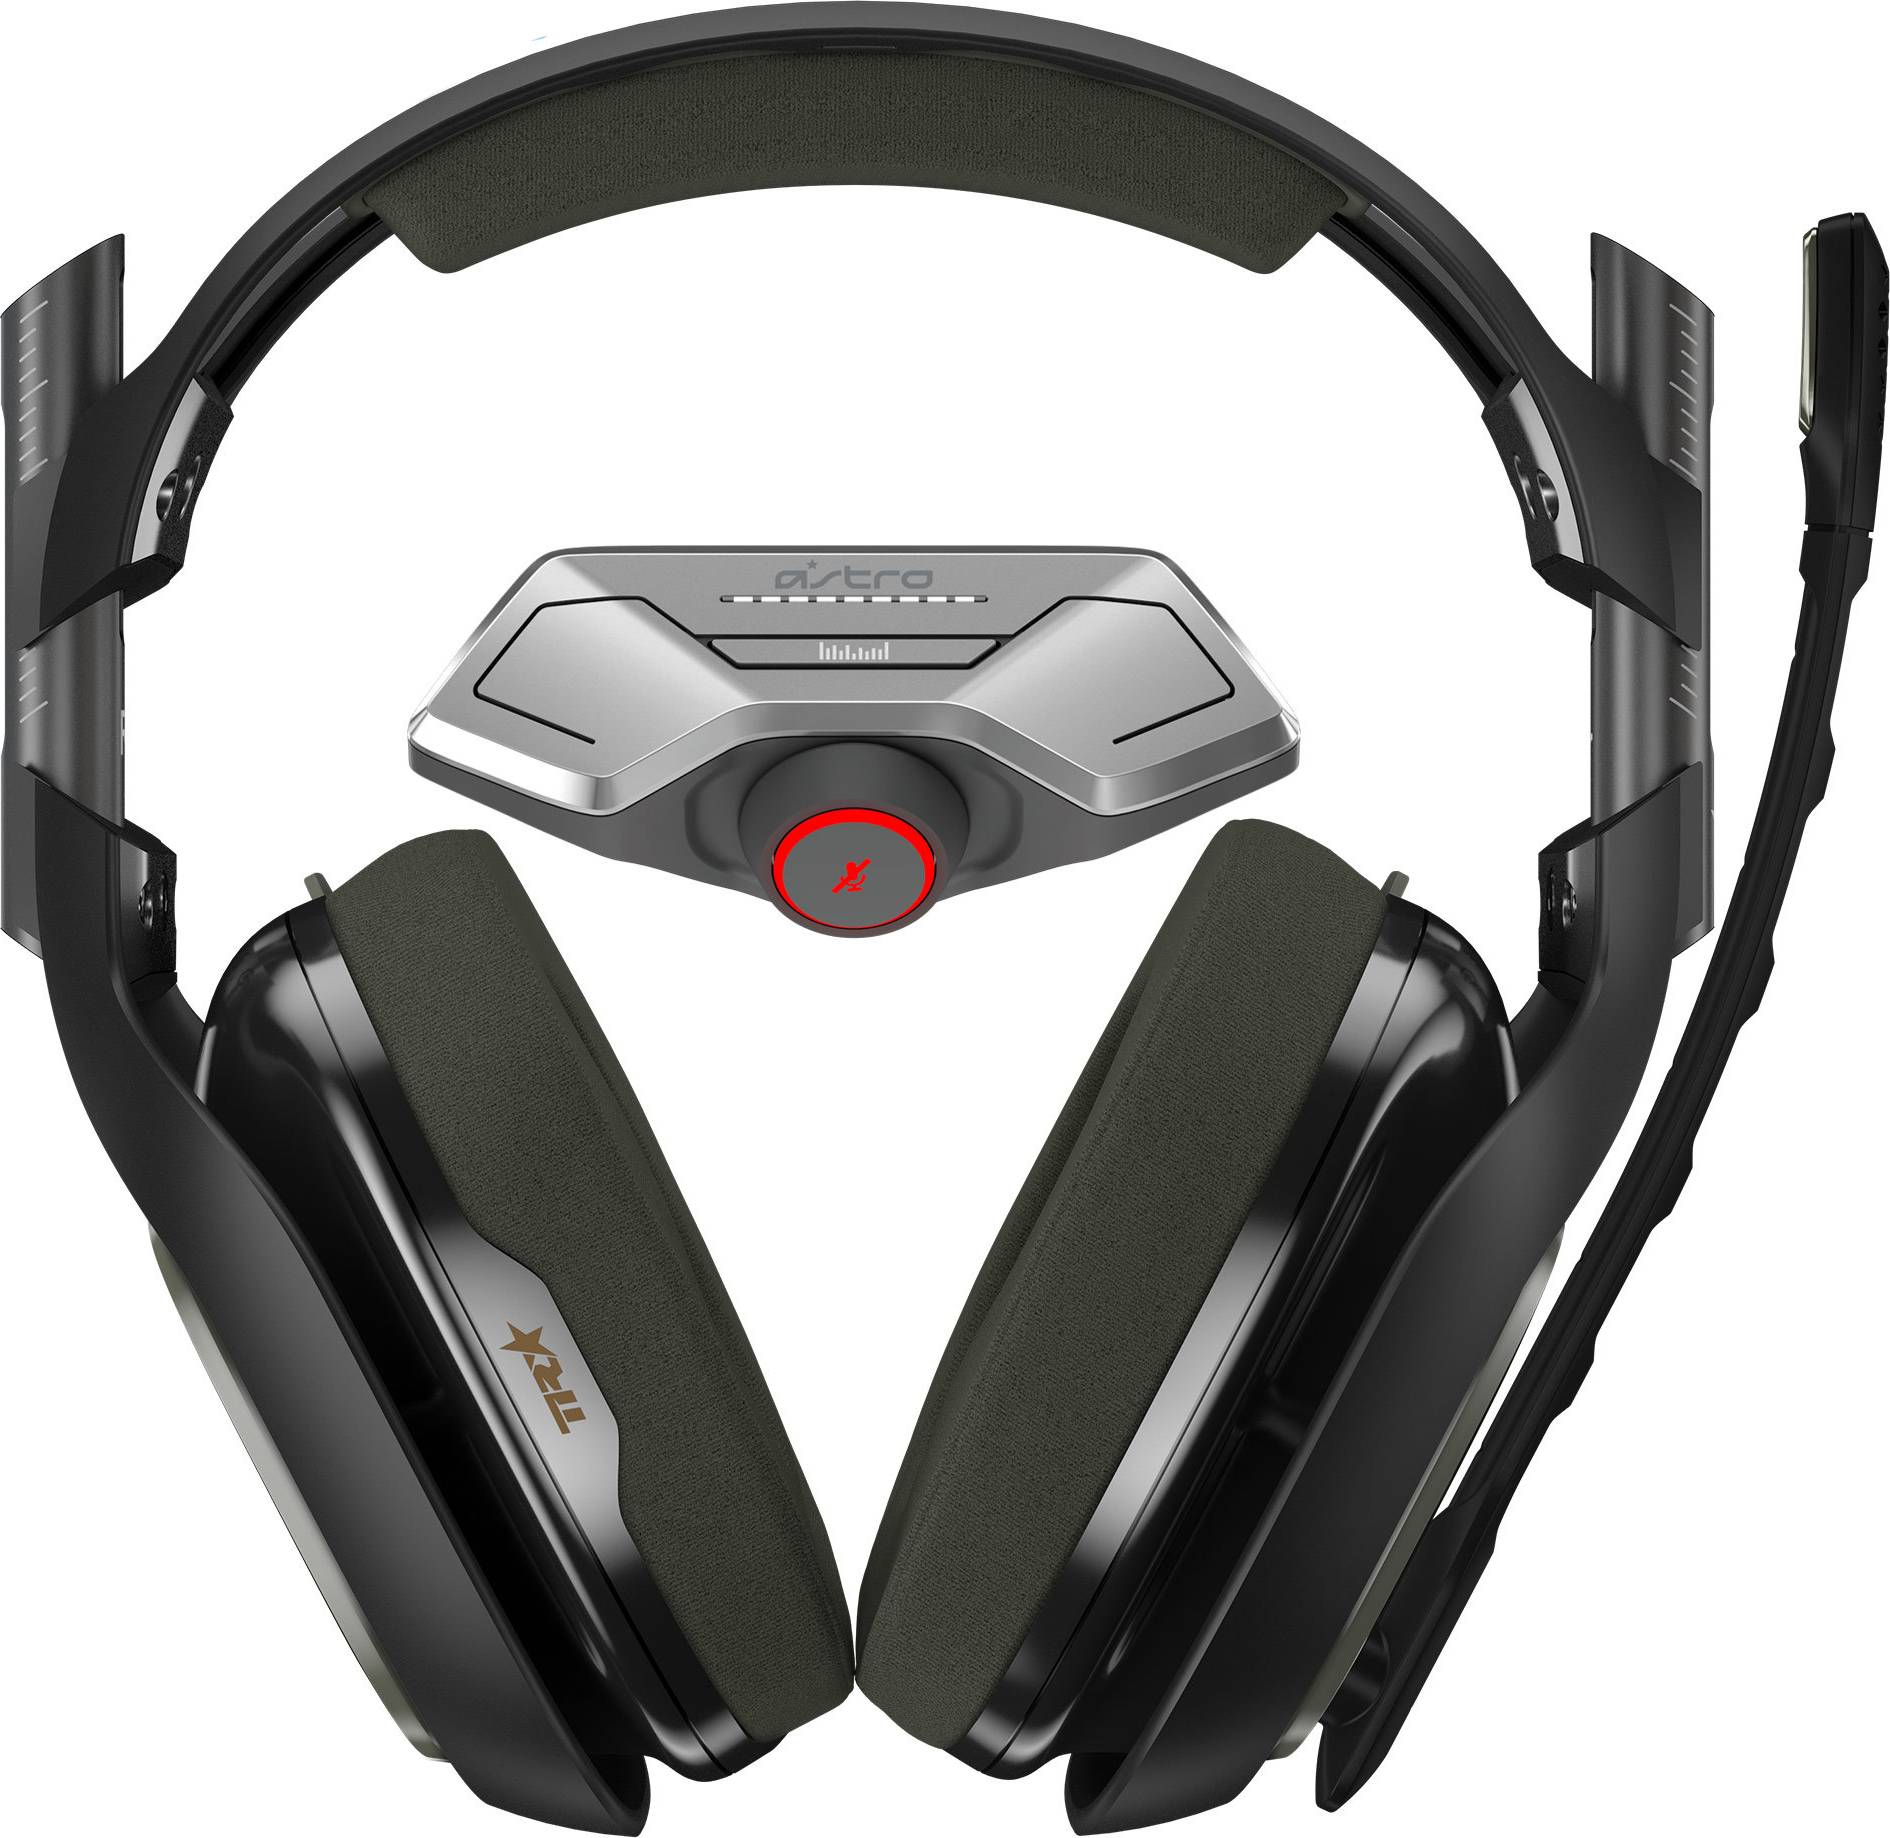  Bild på Astro A40 TR Headset + Mixamp M80 For XB1 gaming headset